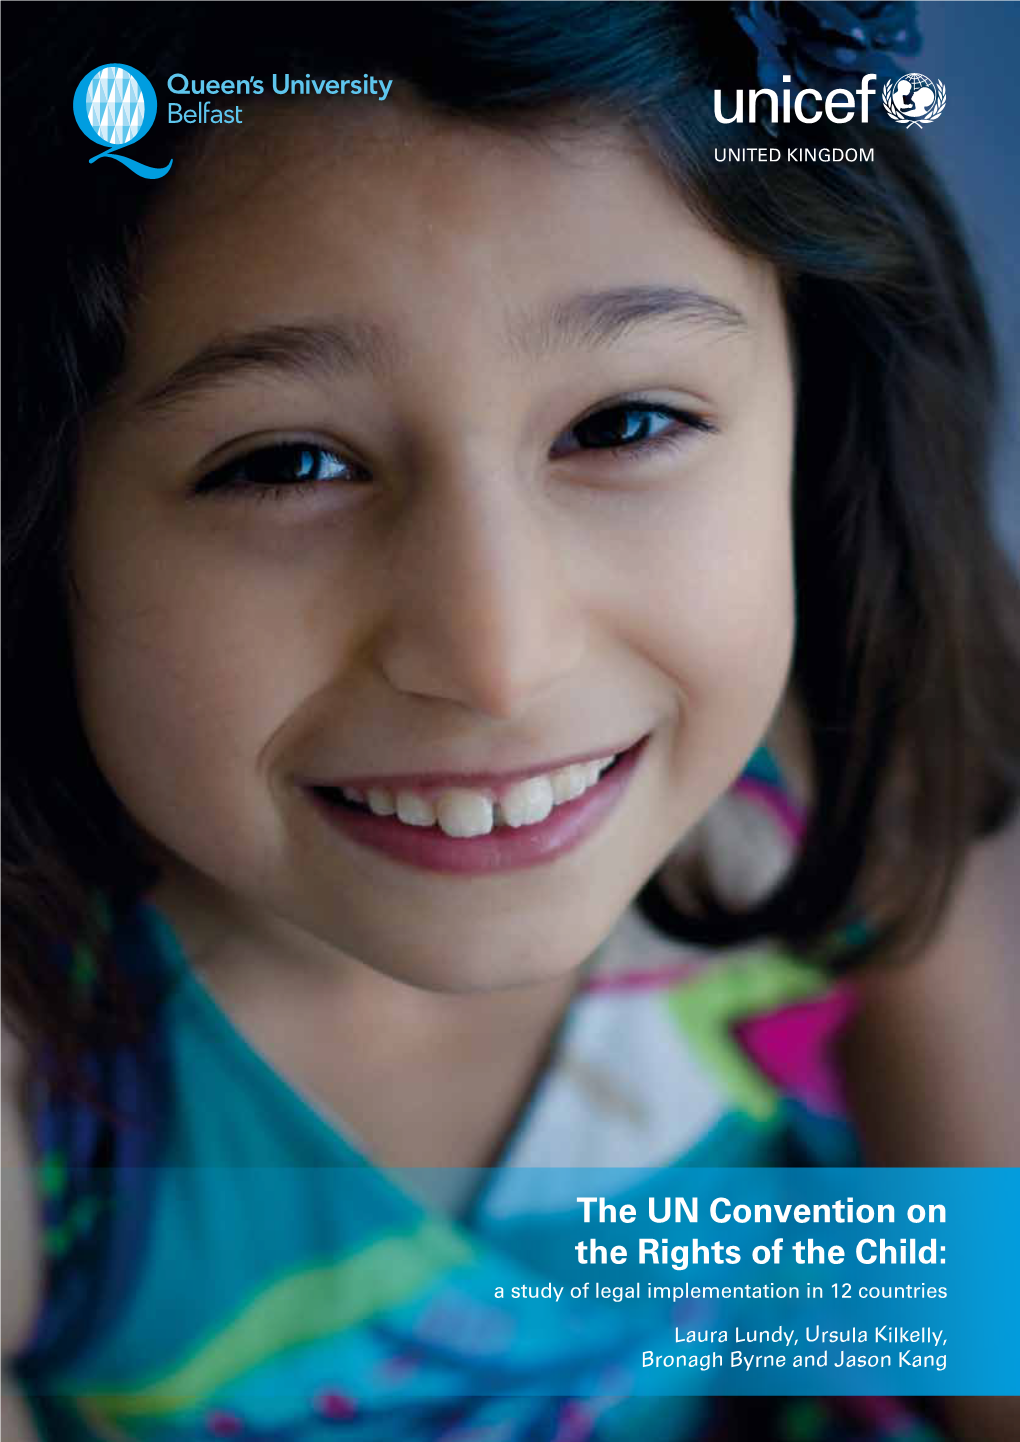 The UN Convention on the Rights of the Child: a Study of Legal Implementation in 12 Countries